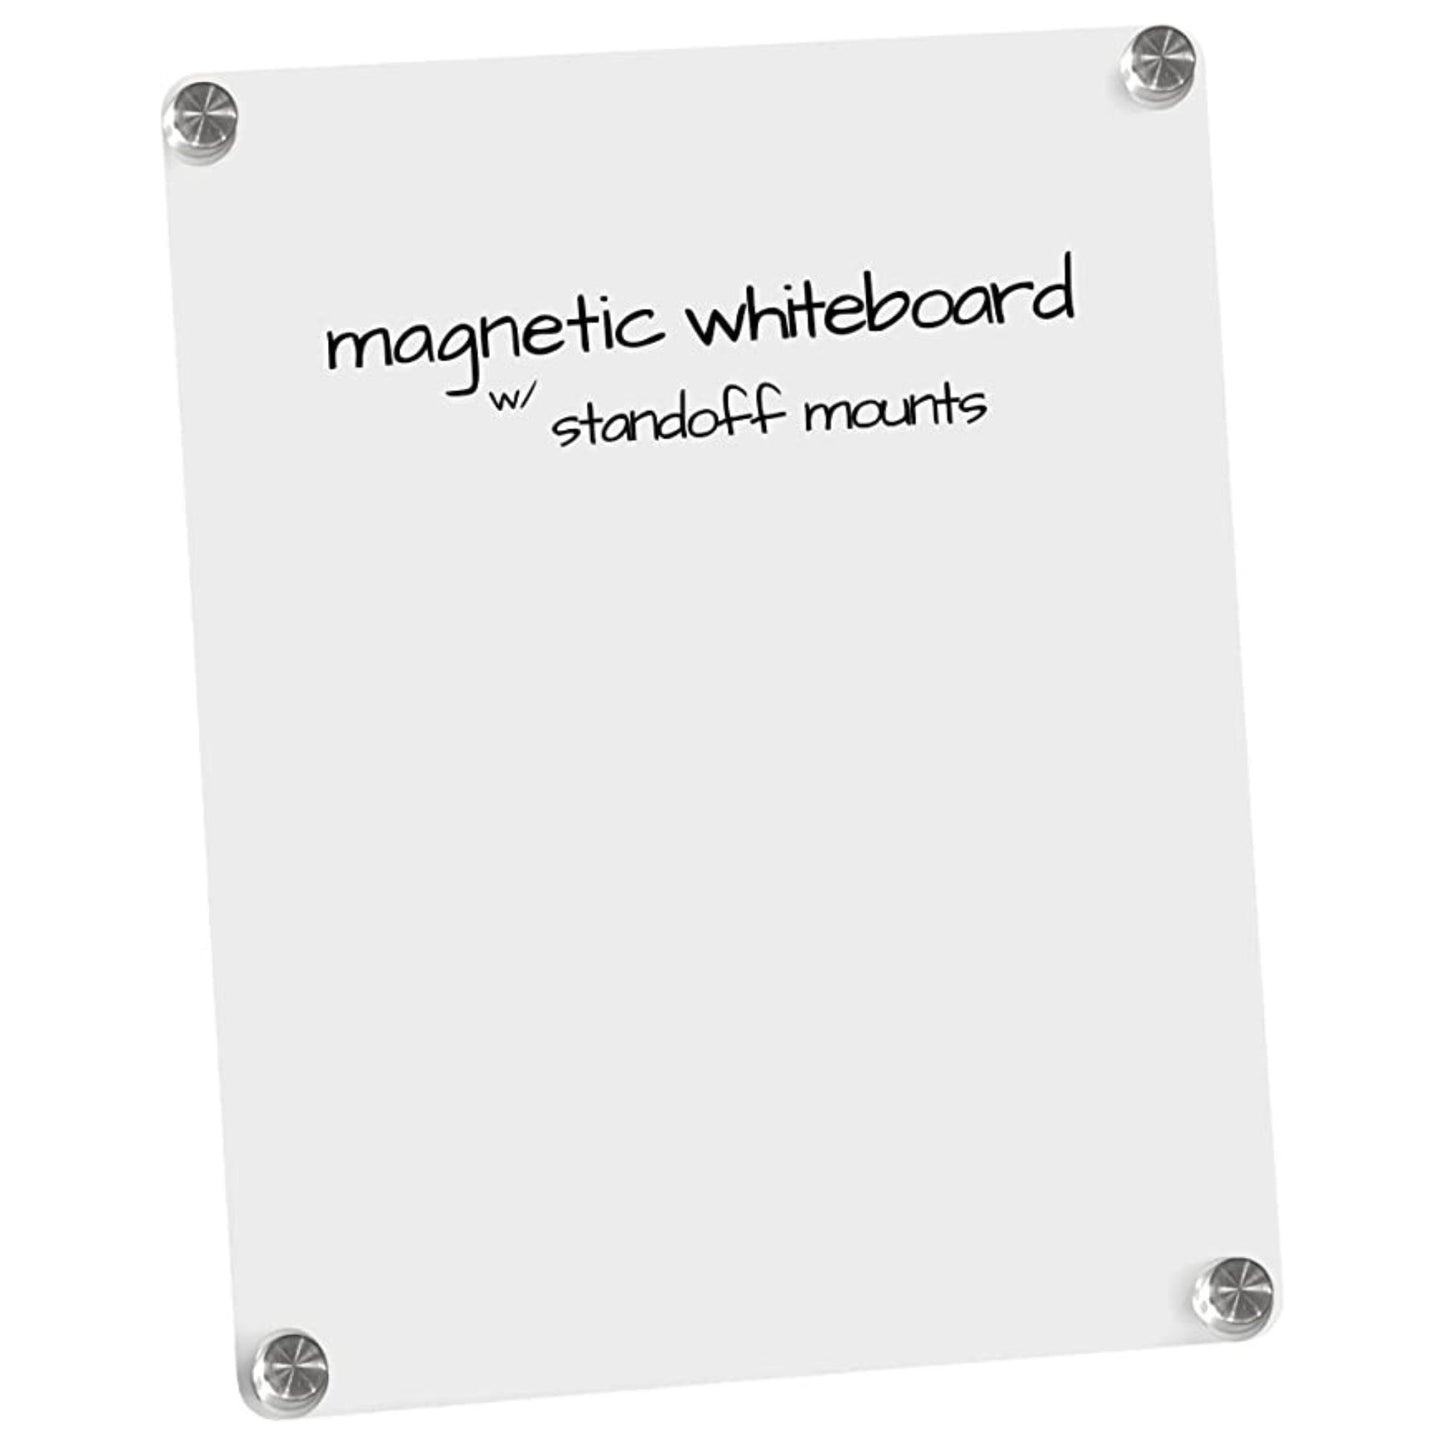 8in x 12in Magnetic Stand-off Erasable Whiteboard for Fridge, File Cabinet - Magnetic Mounts